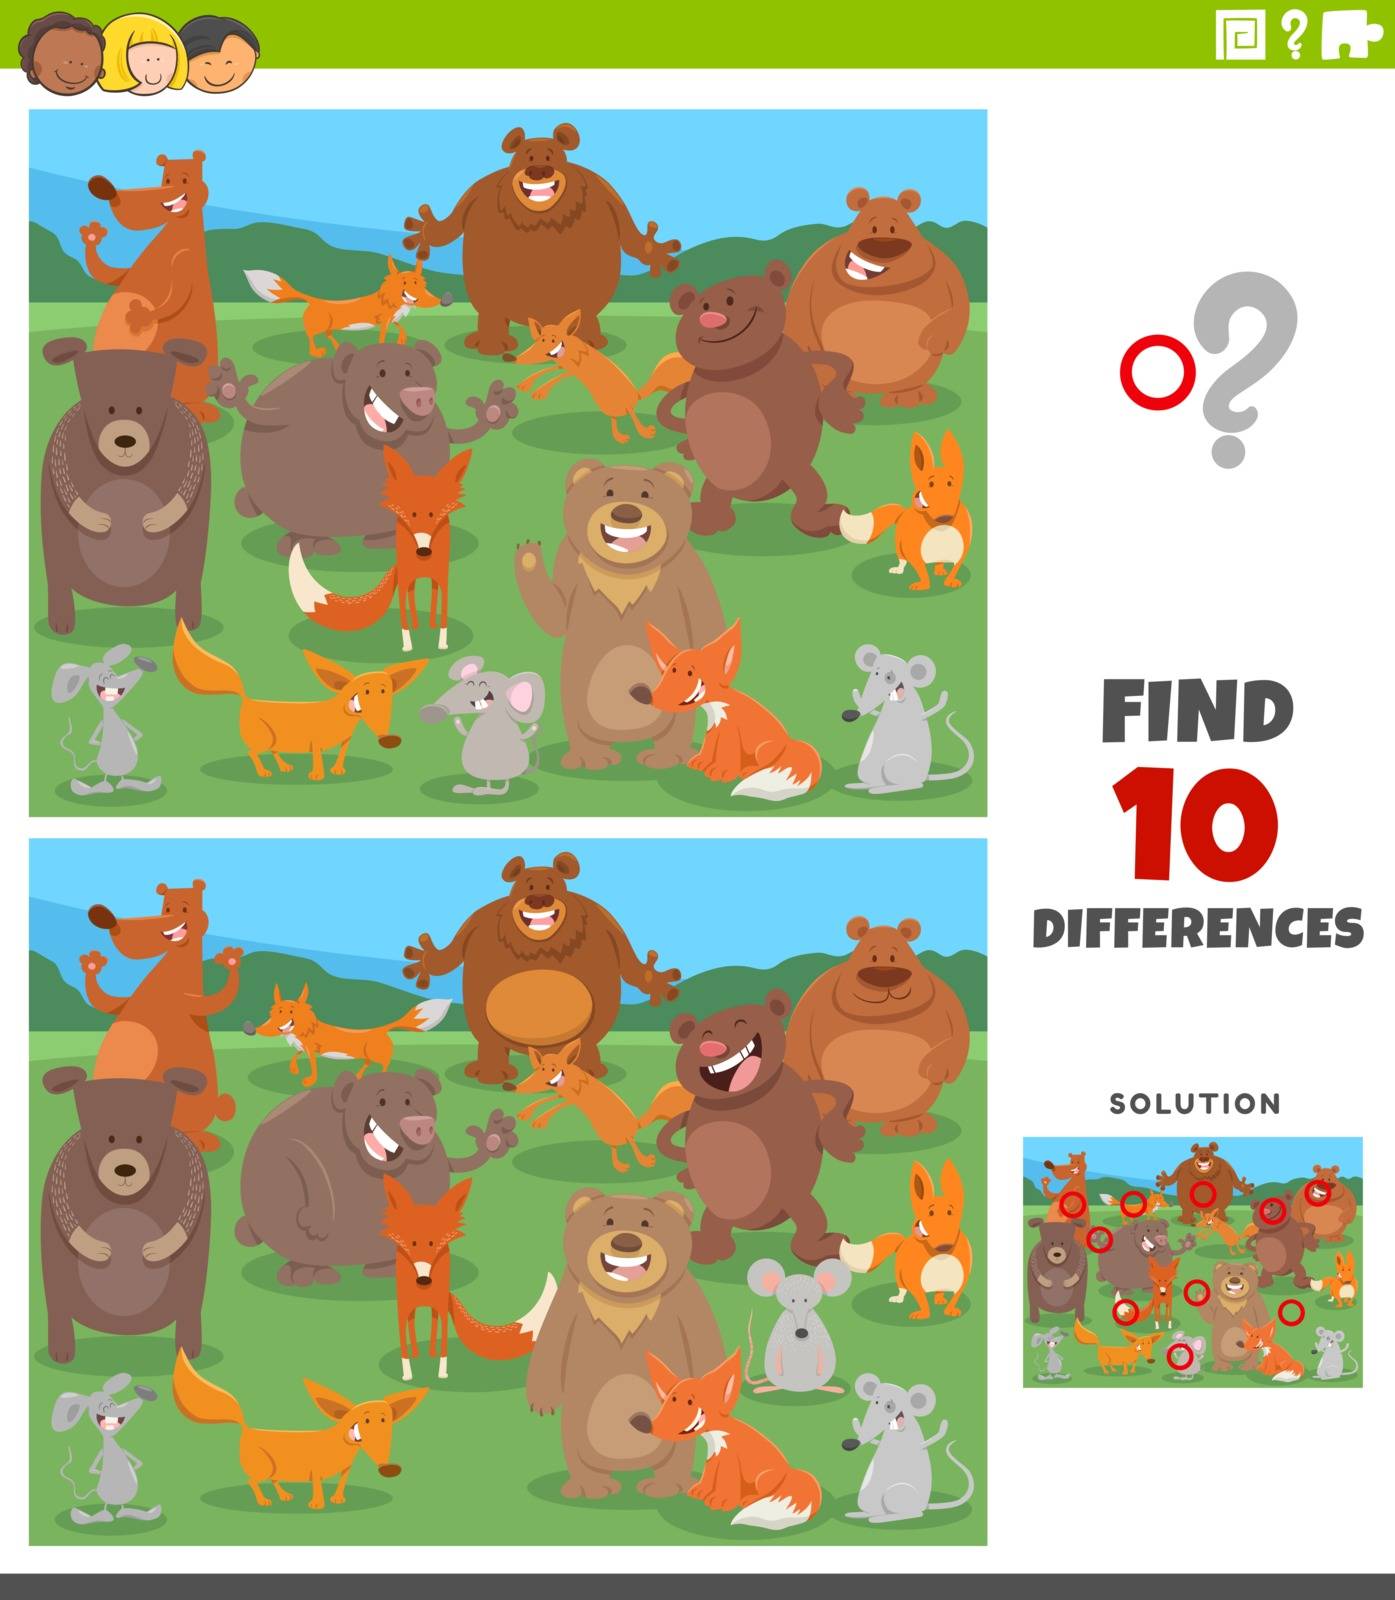 Cartoon Illustration of Finding Differences Between Pictures Educational Game for Kids with Funny Wild Animal Characters Group